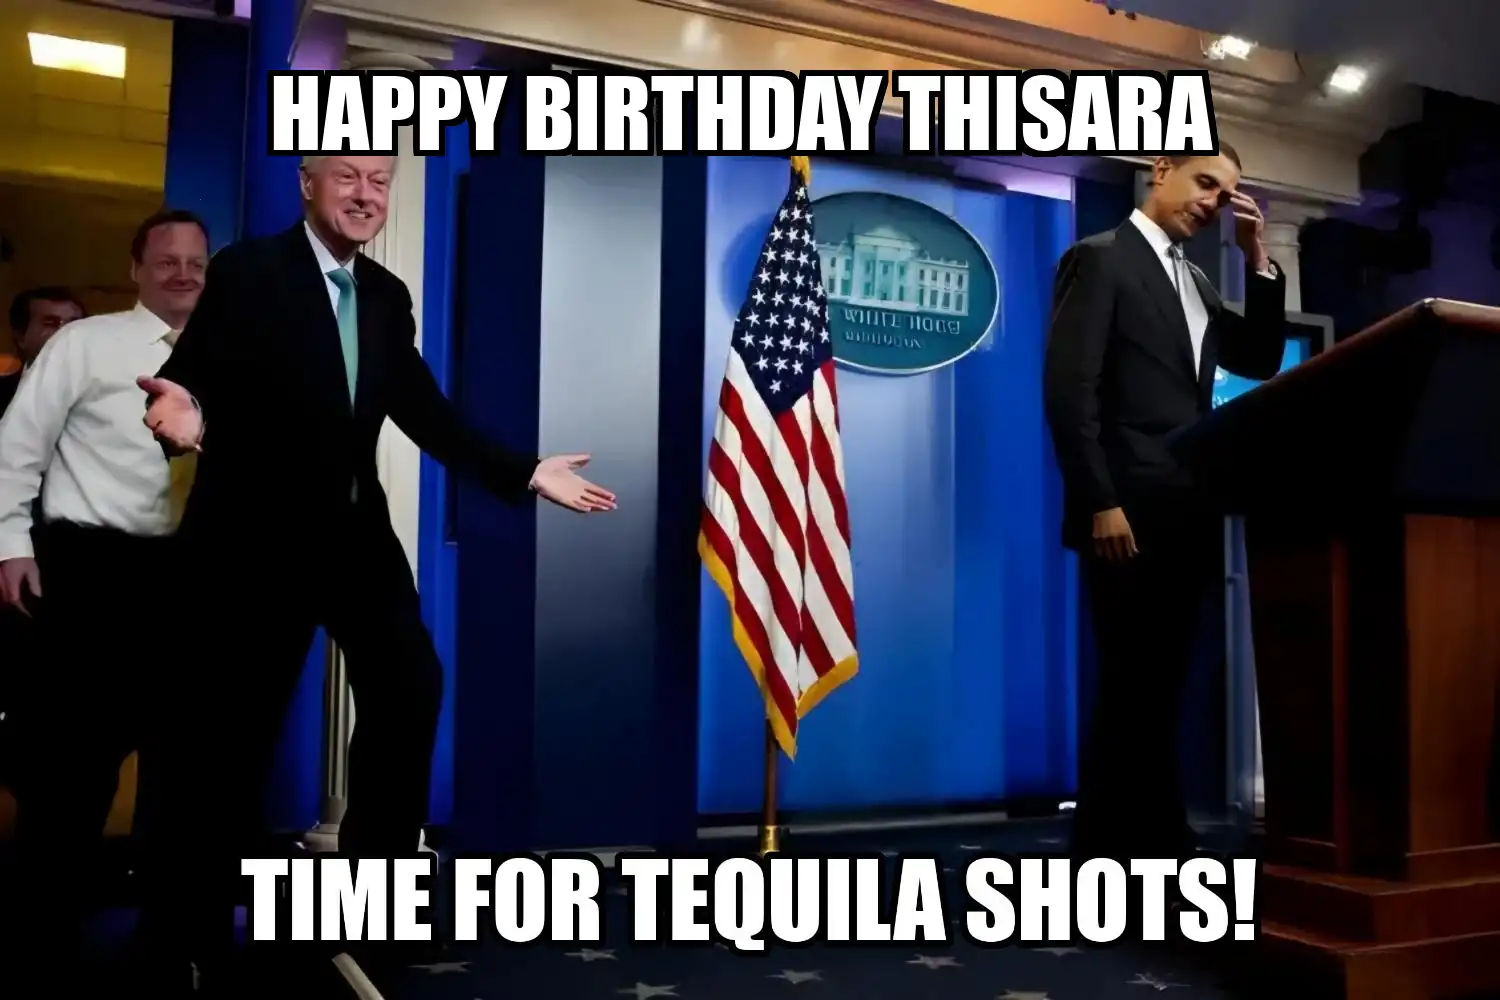 Happy Birthday Thisara Time For Tequila Shots Memes